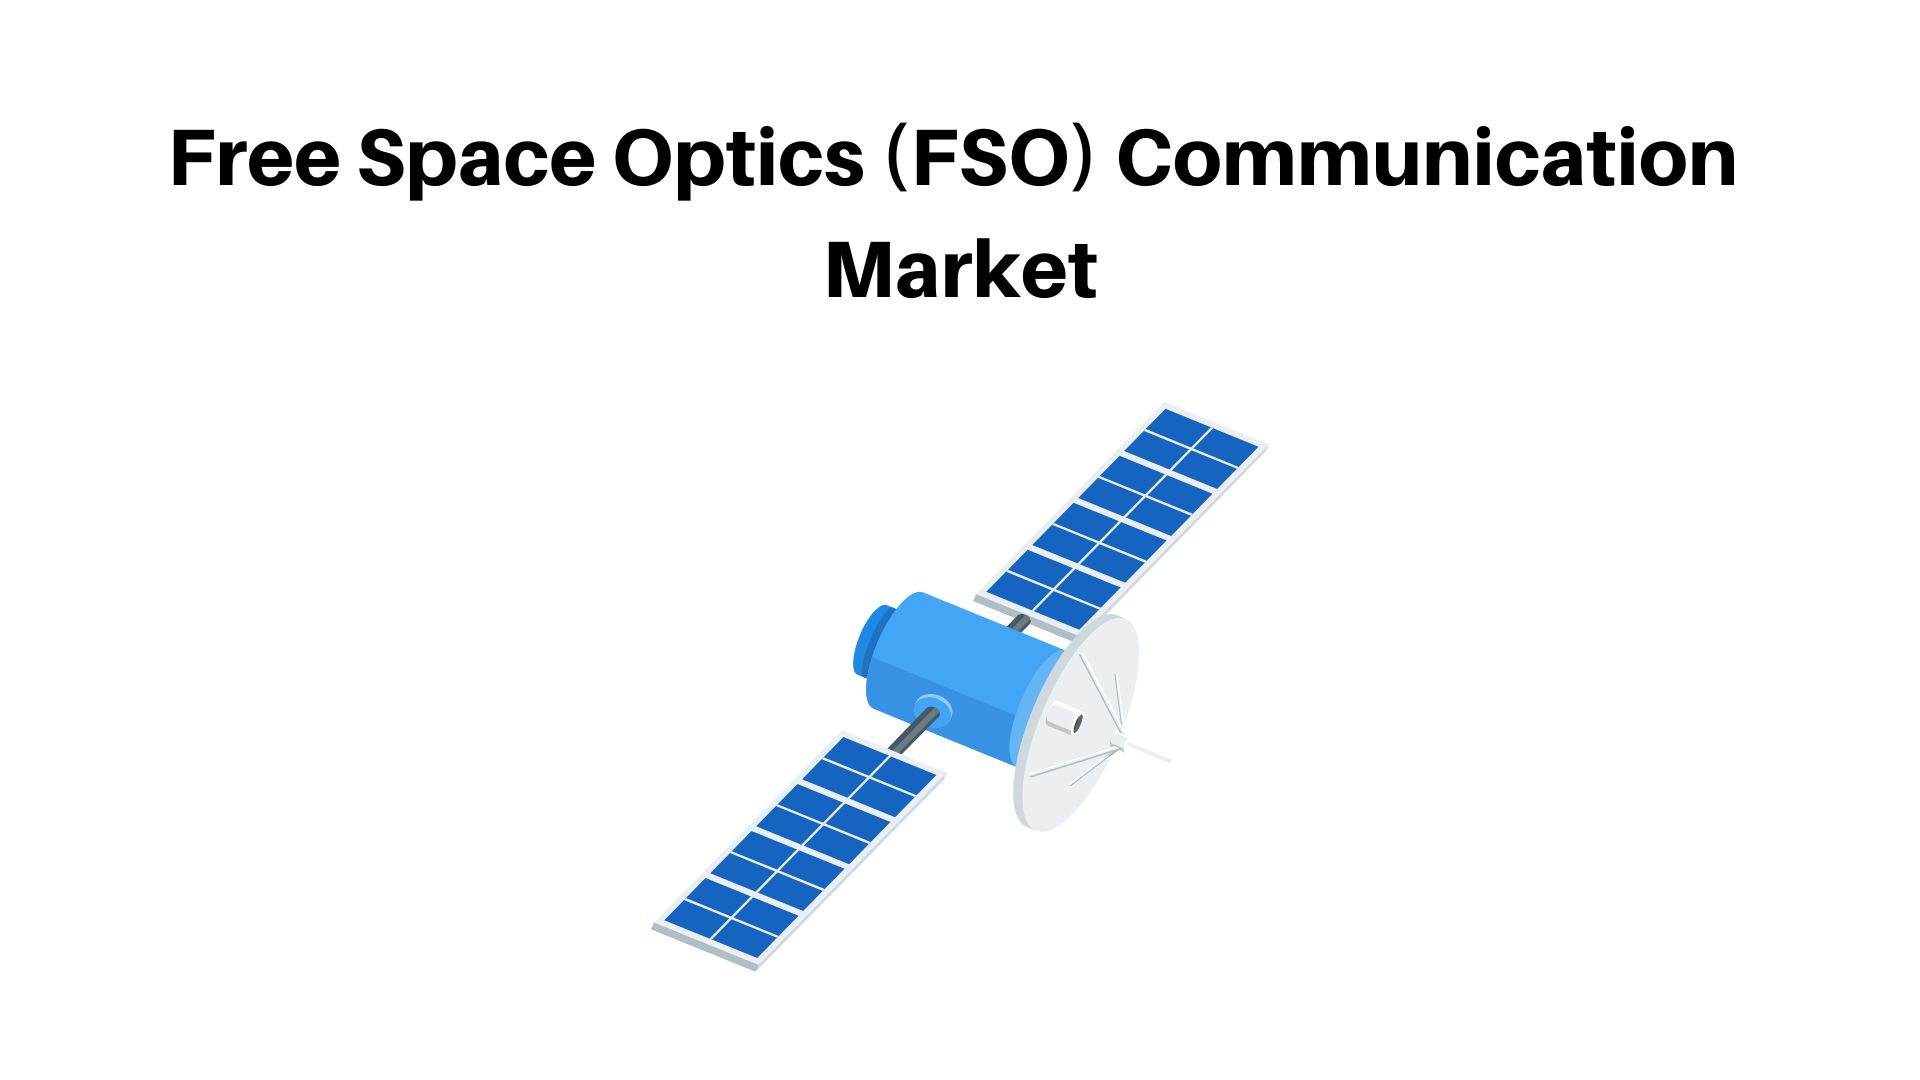 Free Space Optics (FSO) Communication Market Size to Hit Around ( USD 12.0 Billion by 2032 ) + CAGR of 30.20%